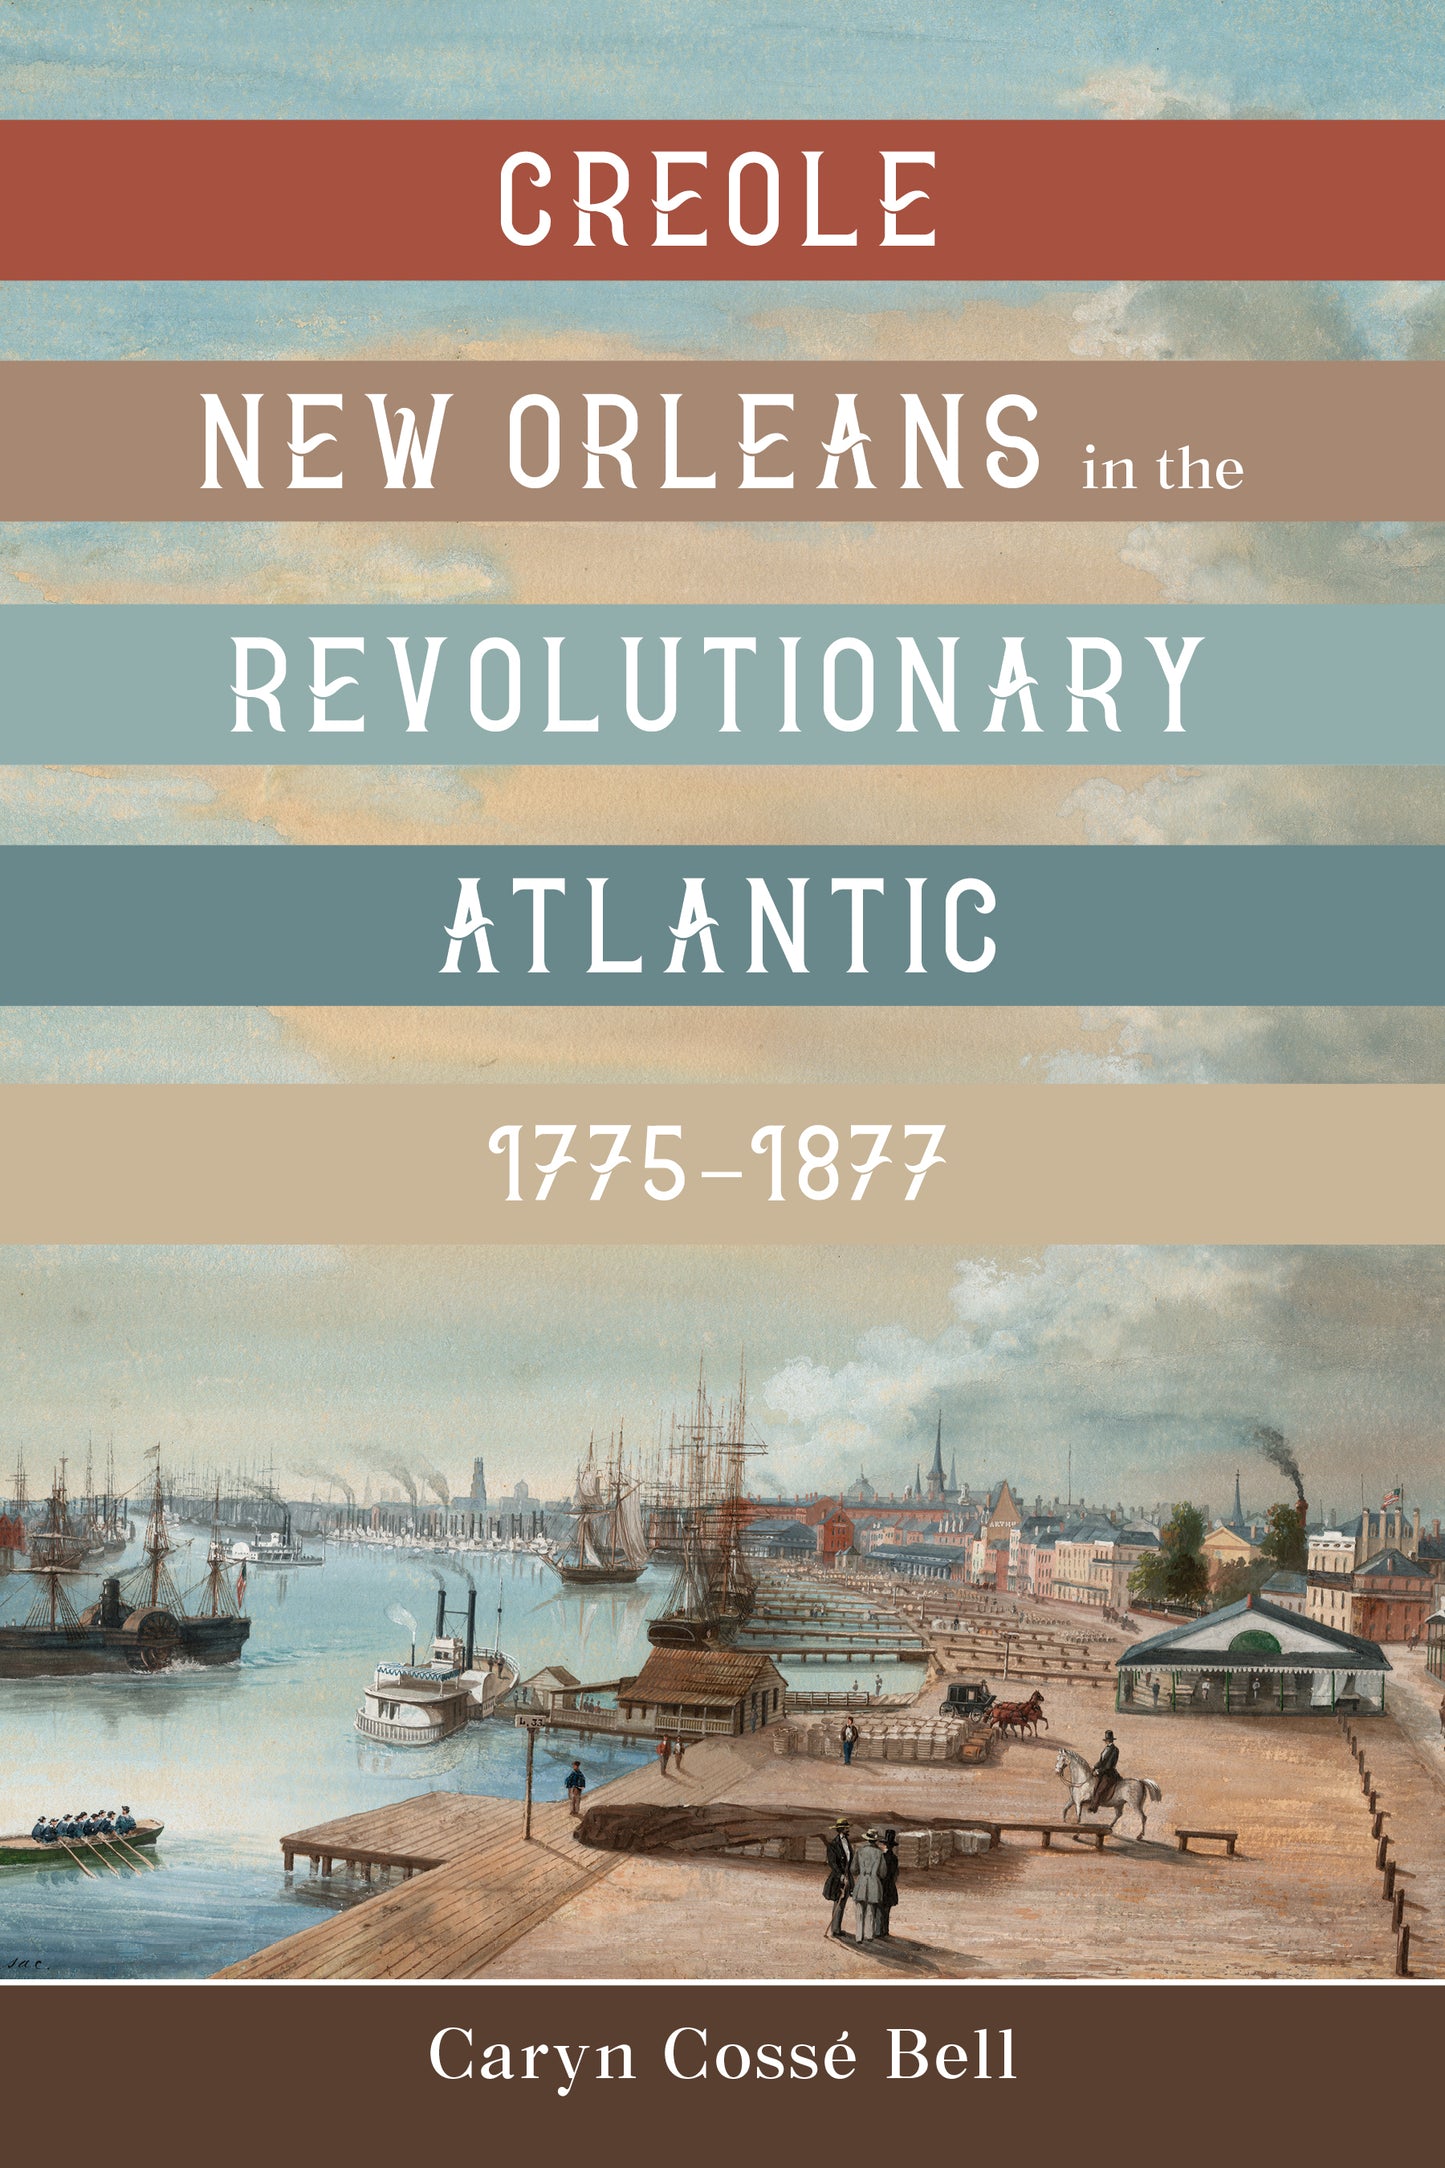 Creole New Orleans in the Revolutionary Atlantic, 1775–1877